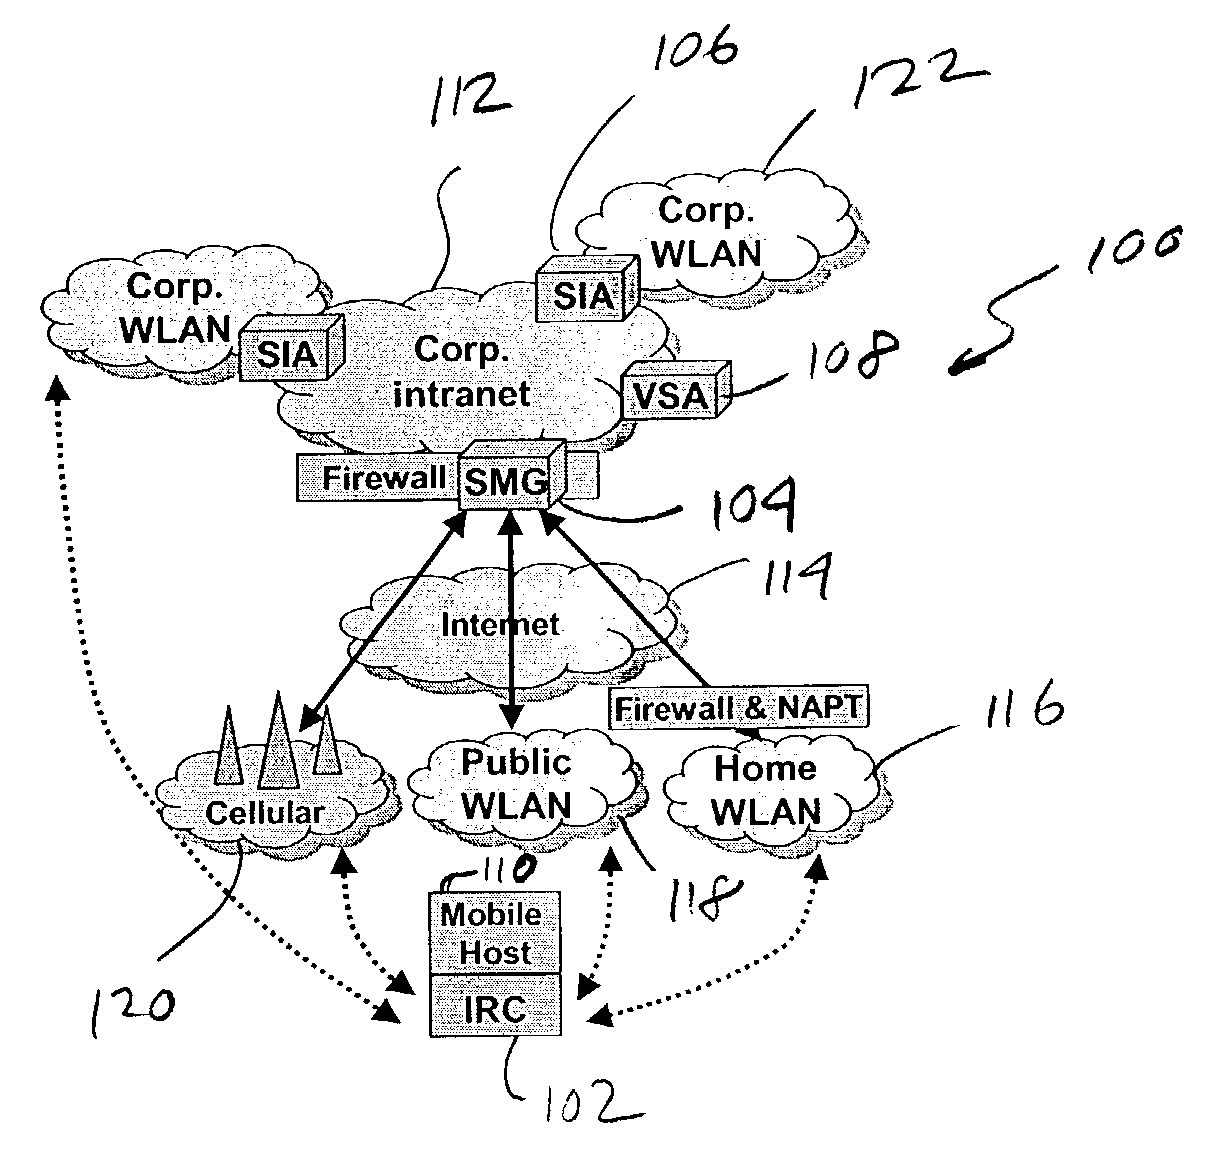 System and method to support networking functions for mobile hosts that access multiple networks